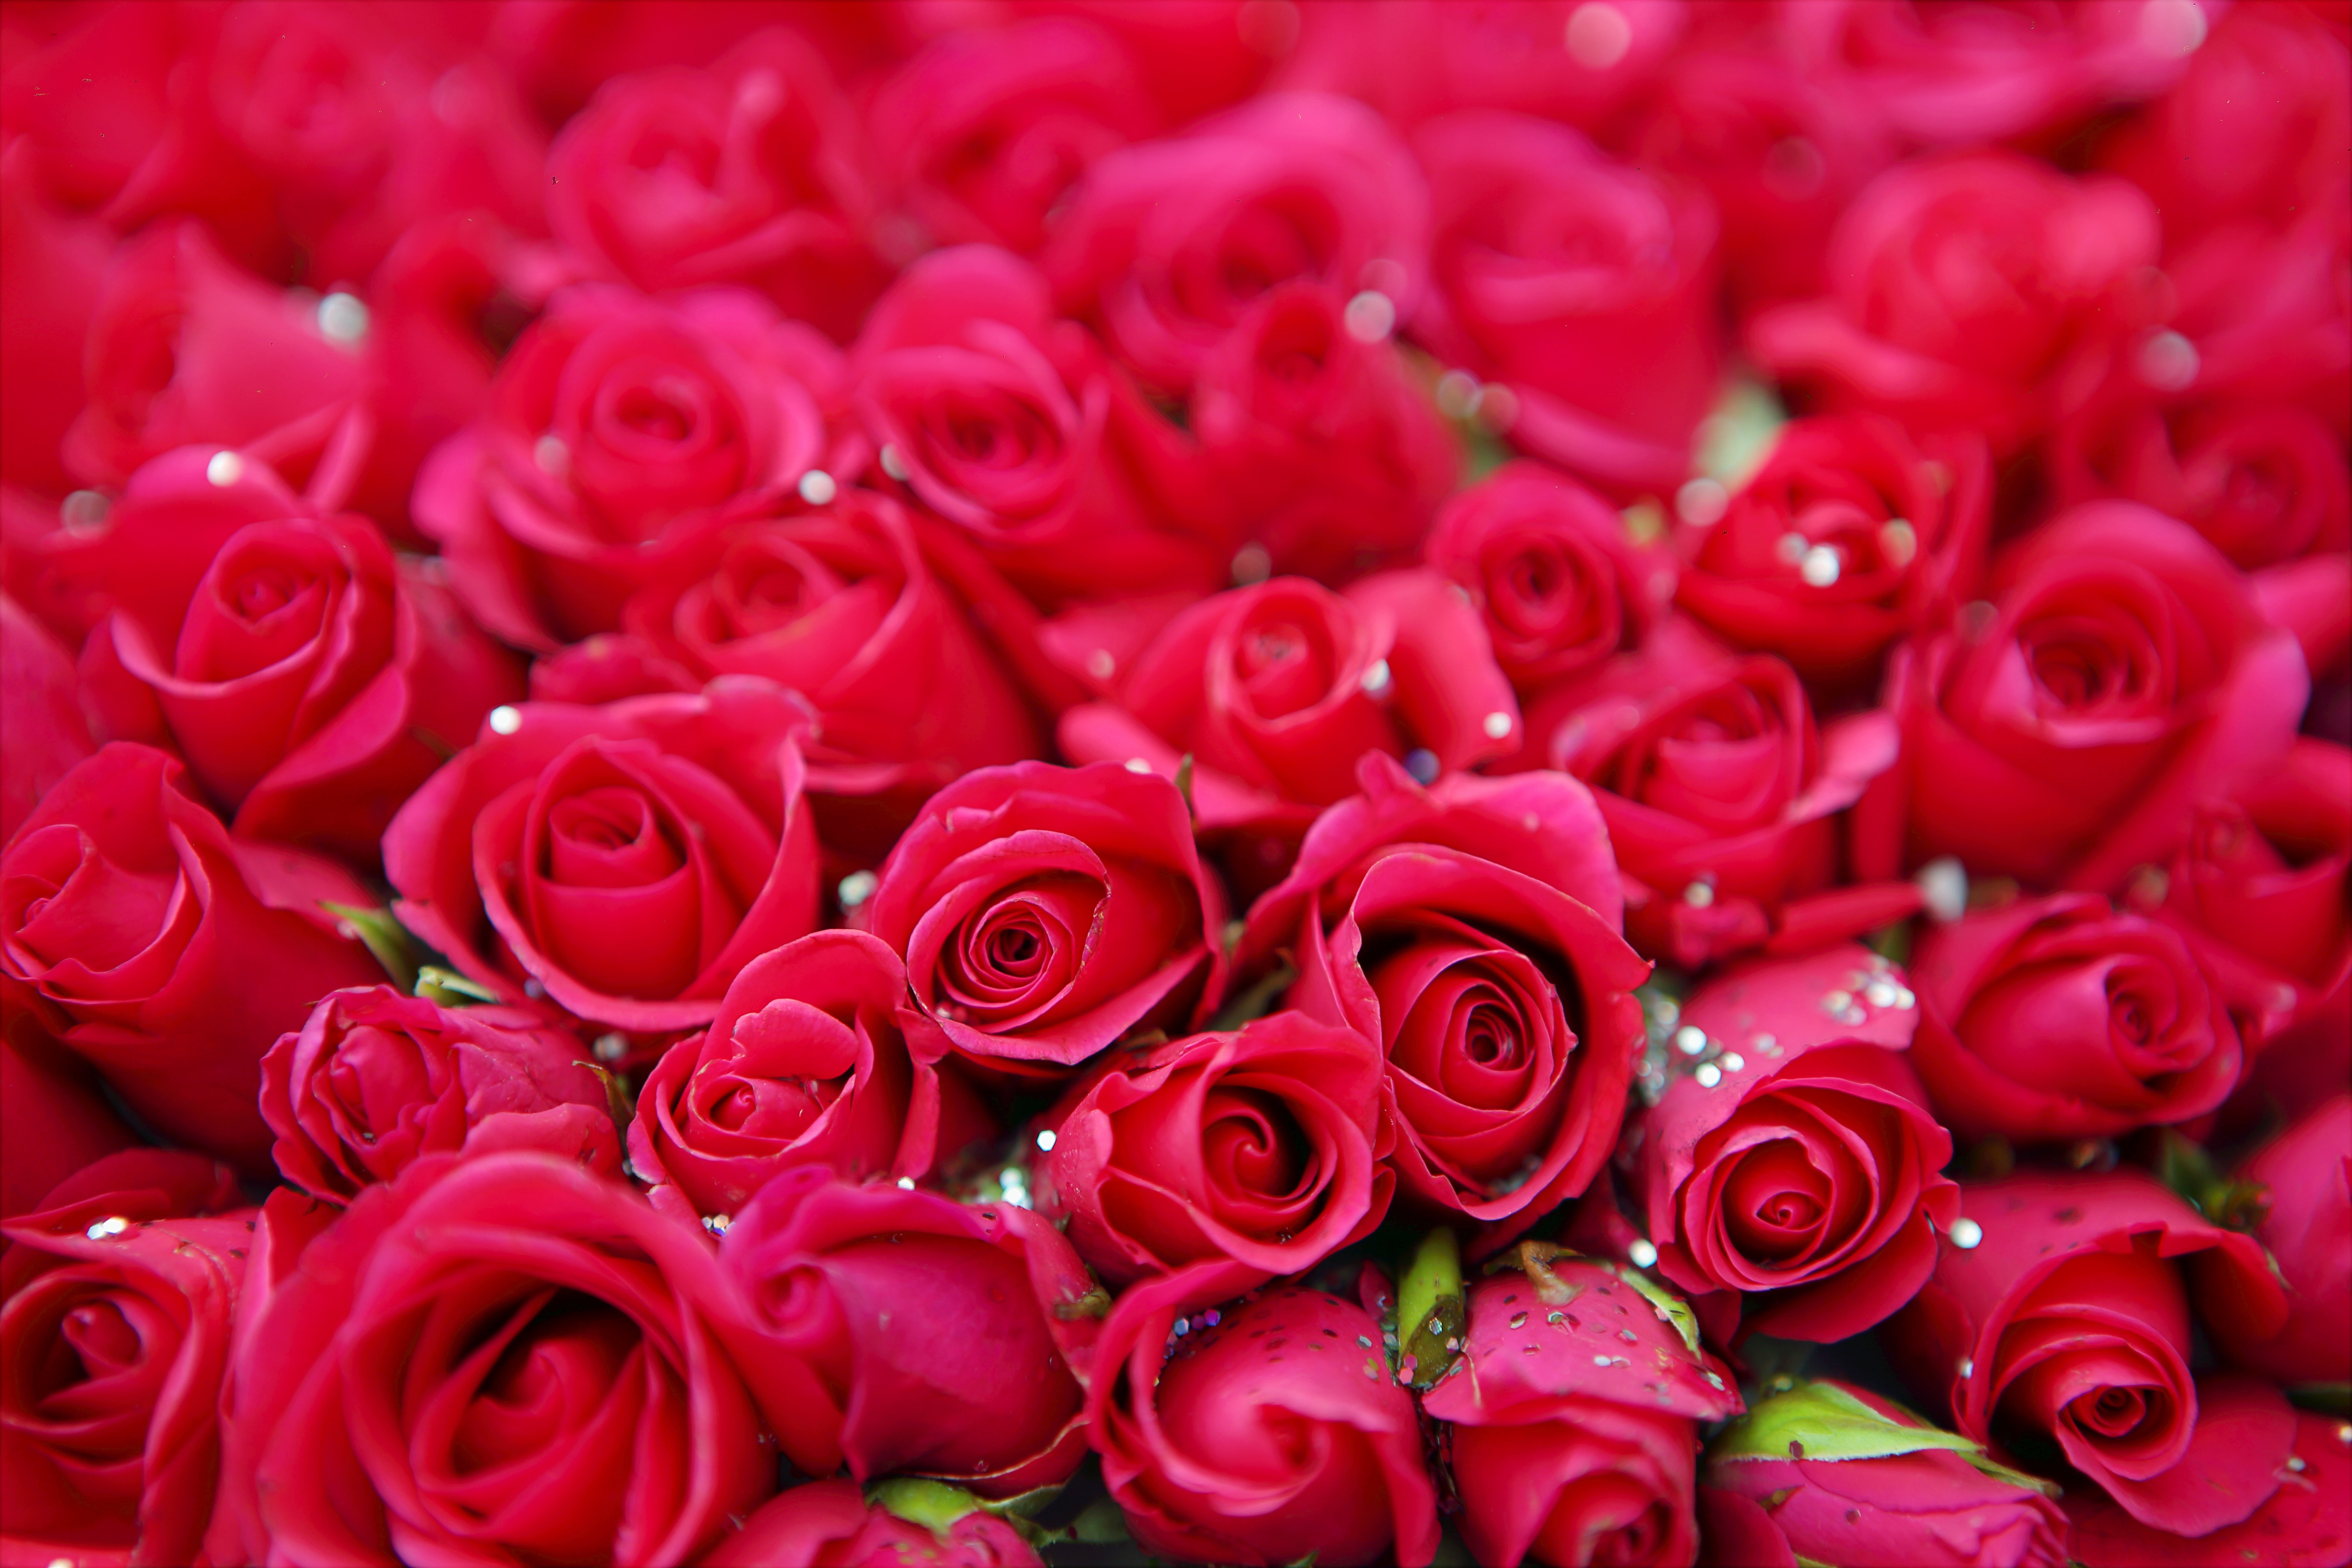 types of red roses